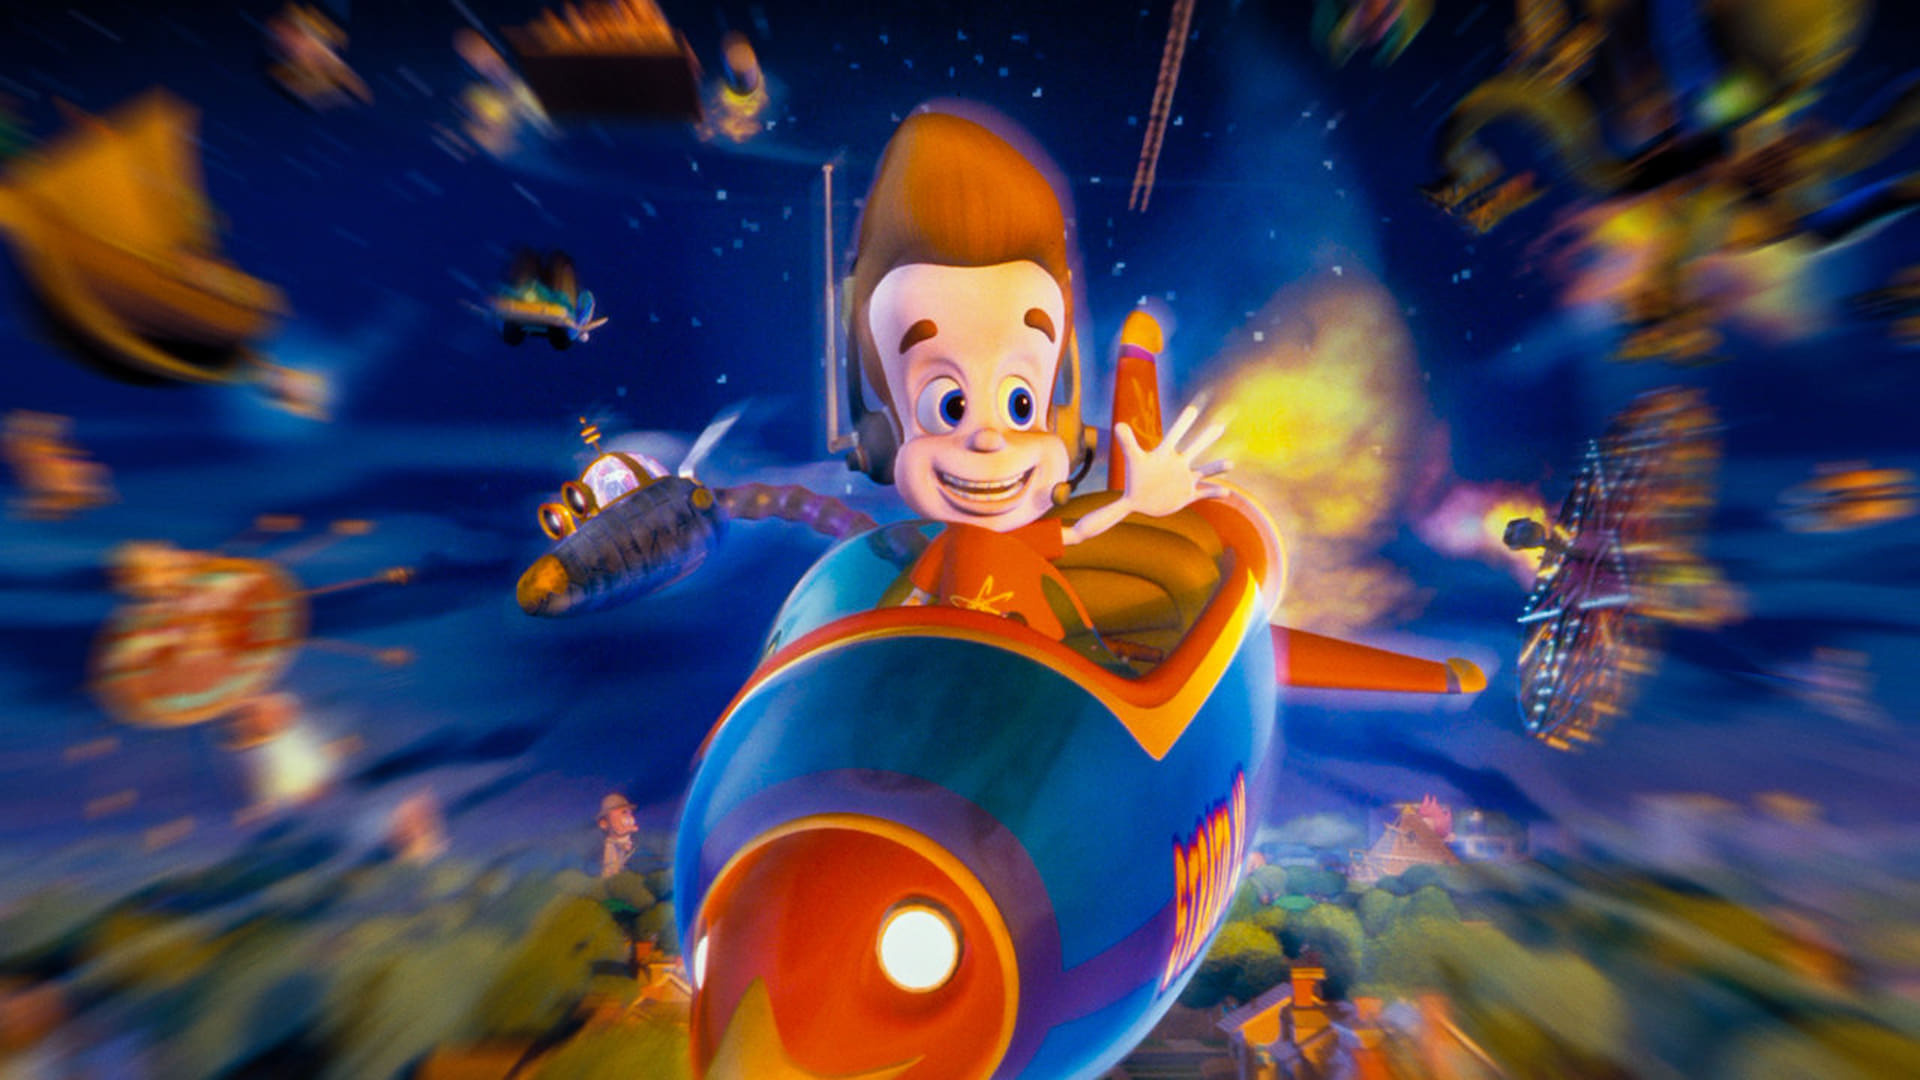 Jimmy Neutron, TV series, Backdrops, Out-of-this-world adventures, 1920x1080 Full HD Desktop